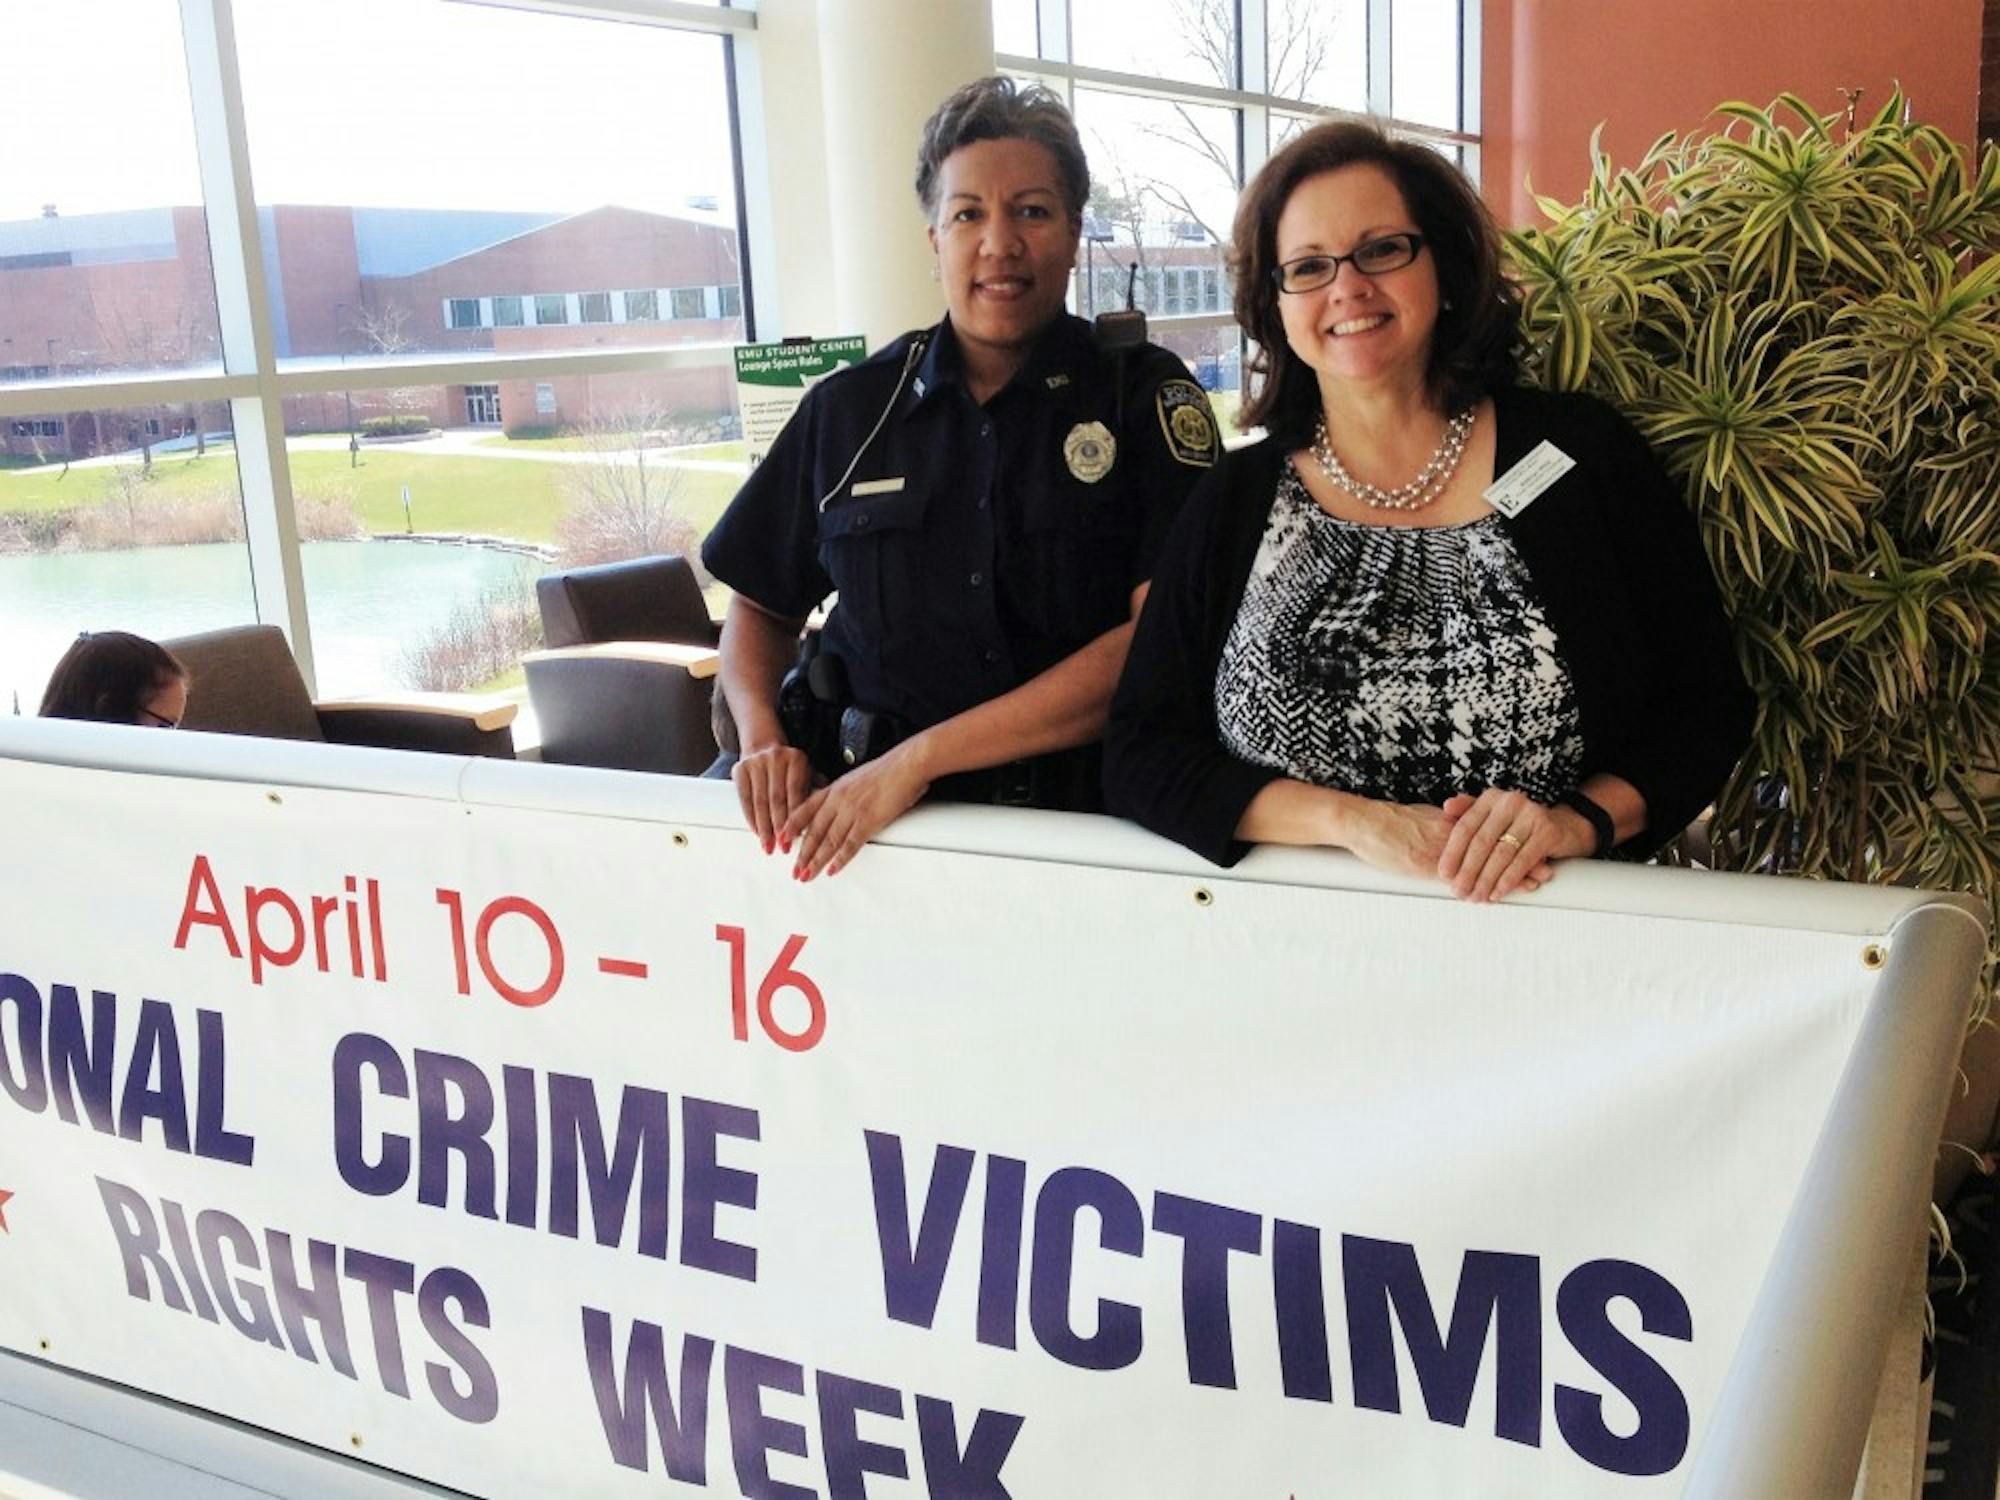 Nation Crime Victims Rights Week share information and raise awareness&nbsp;in the Student Center on April 14.&nbsp;